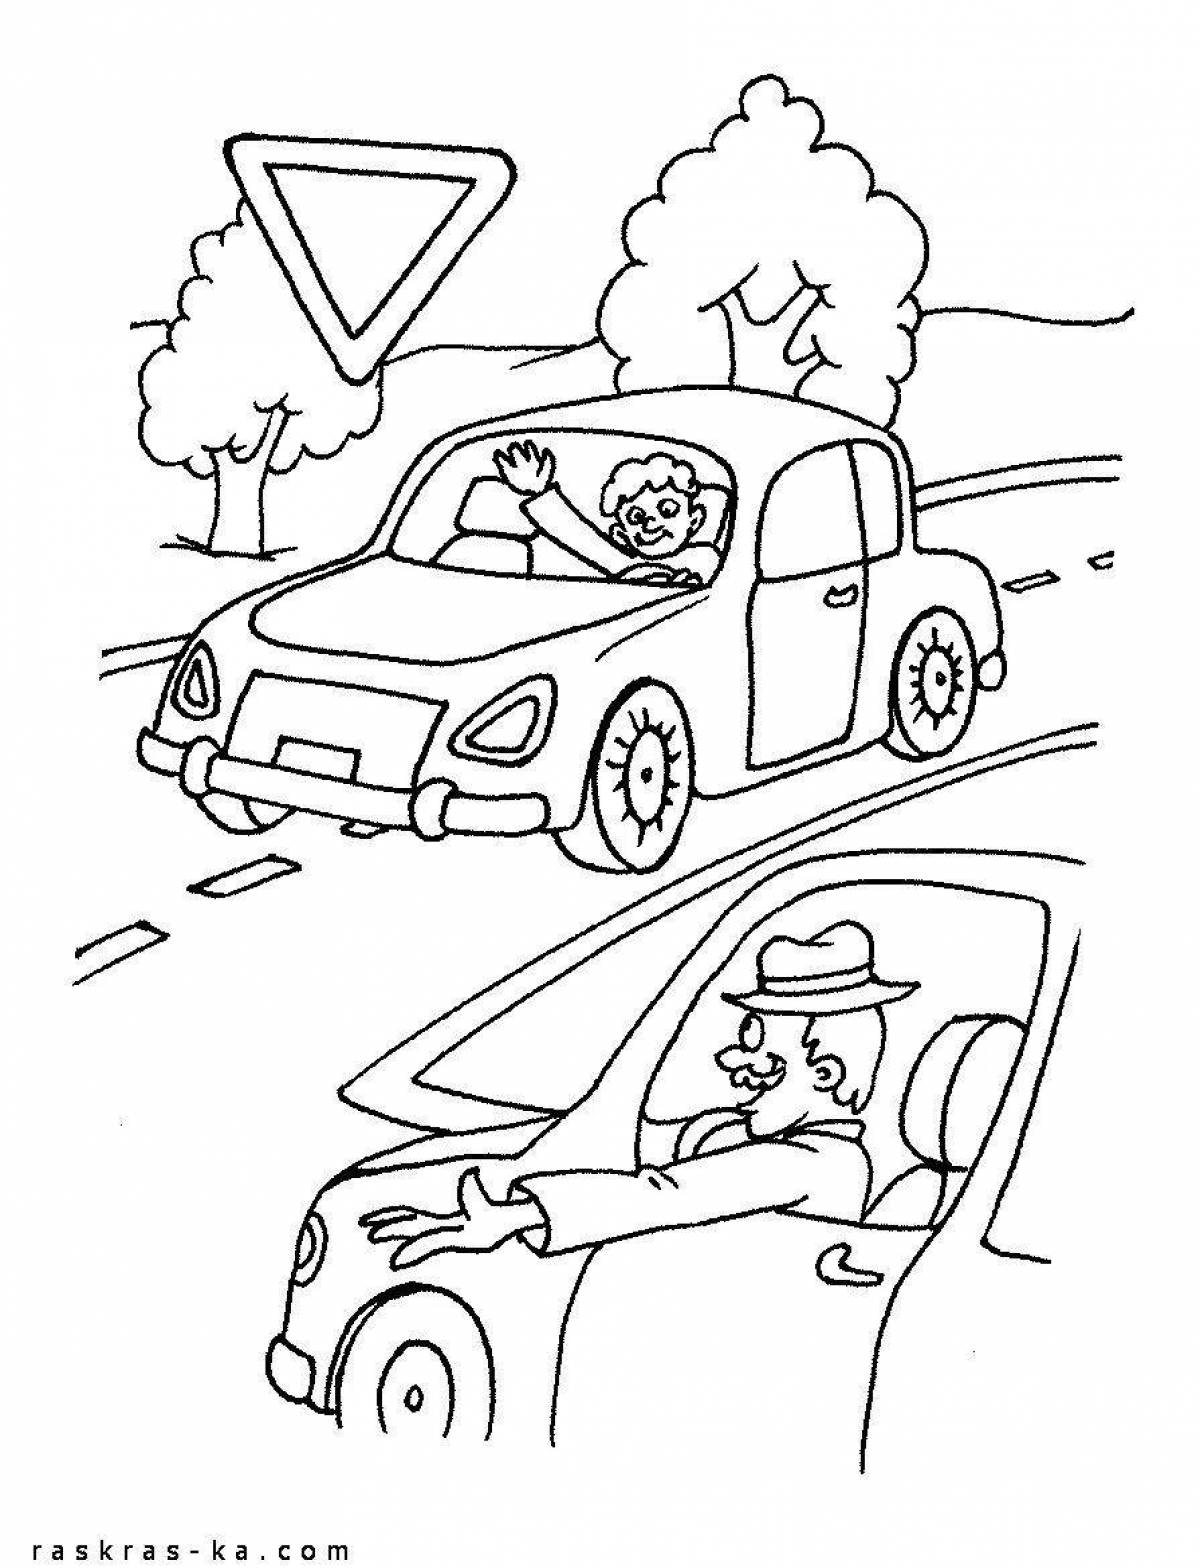 Road safety coloring page